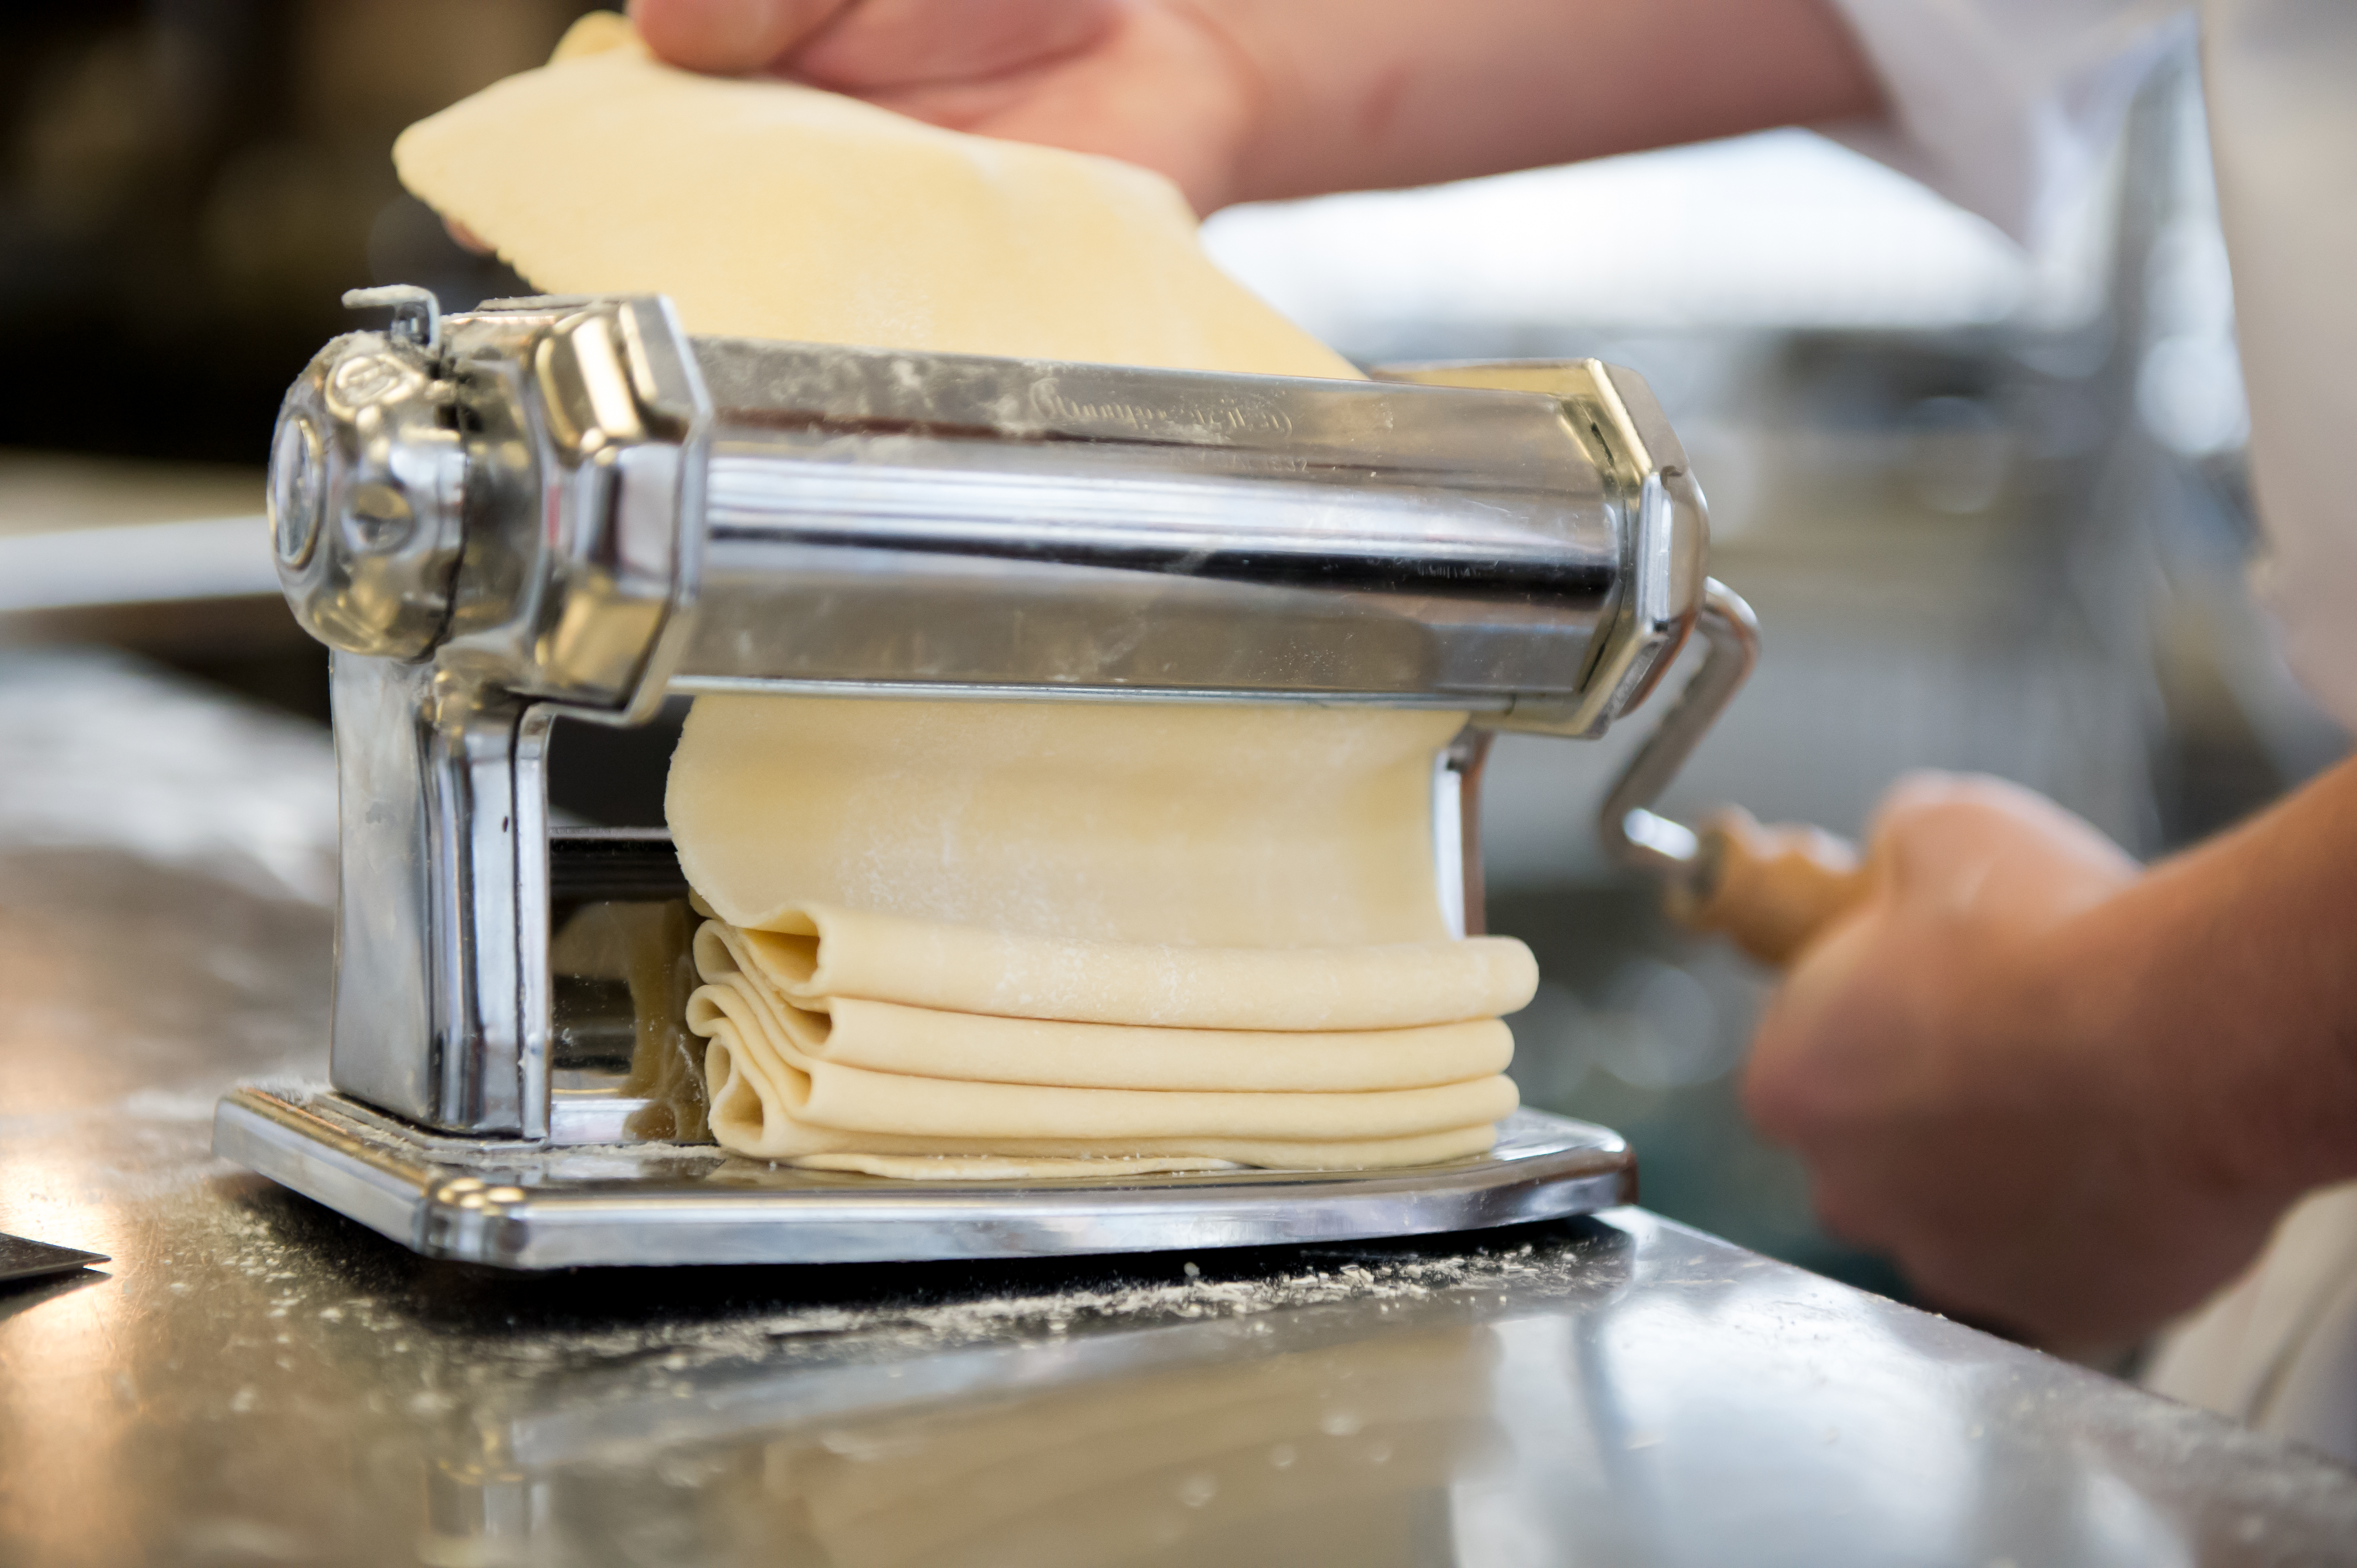 Make your own pasta in a cooking class at the Institute of Culinary Education's New York campus.